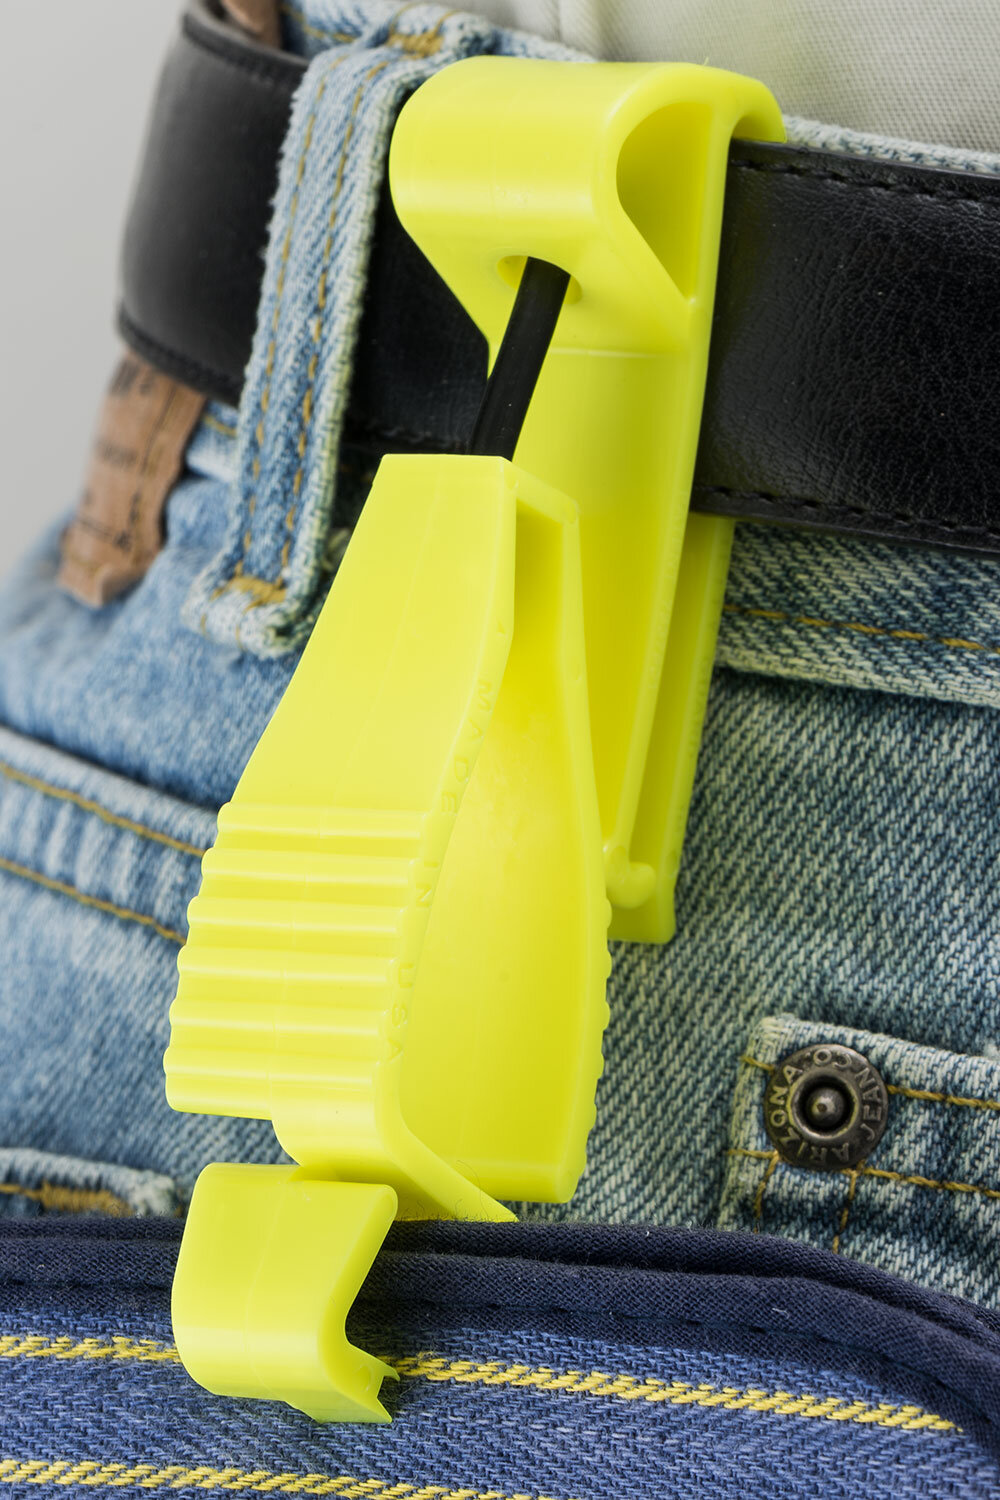 3 Yellow GLOVE GUARD CLIP FOR WORK SAFEFO with patented safety break away MC 